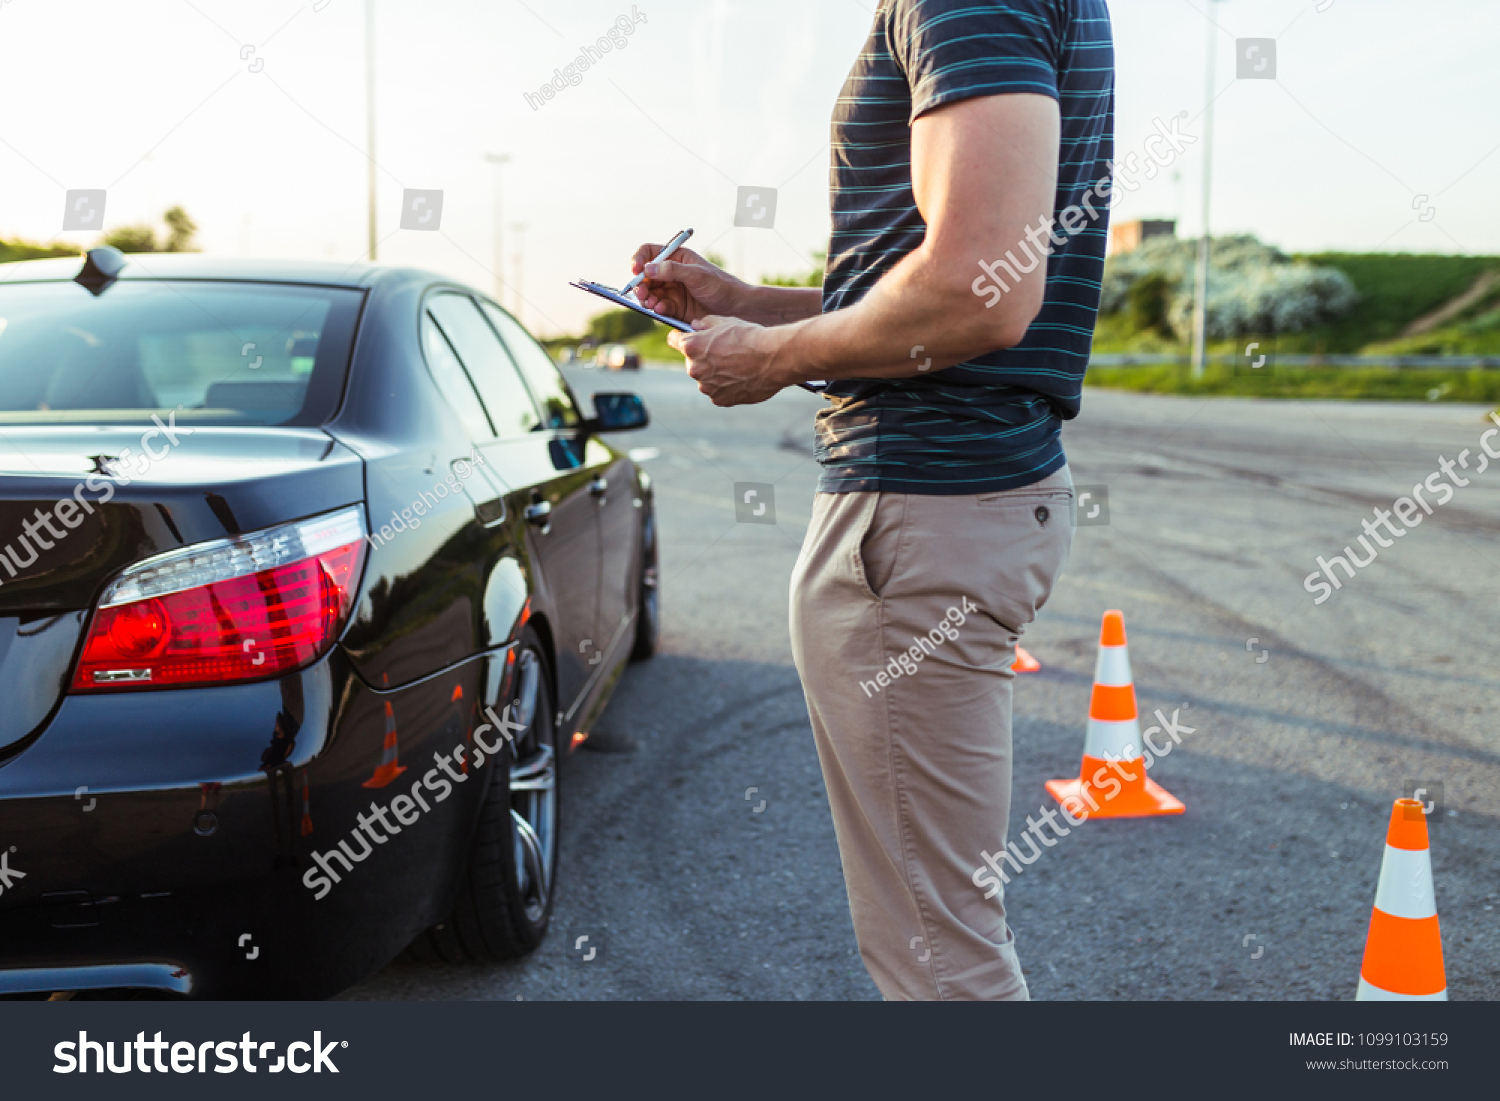 Driving school or test. Driving instructor writing notes after parking lesson. #1099103159